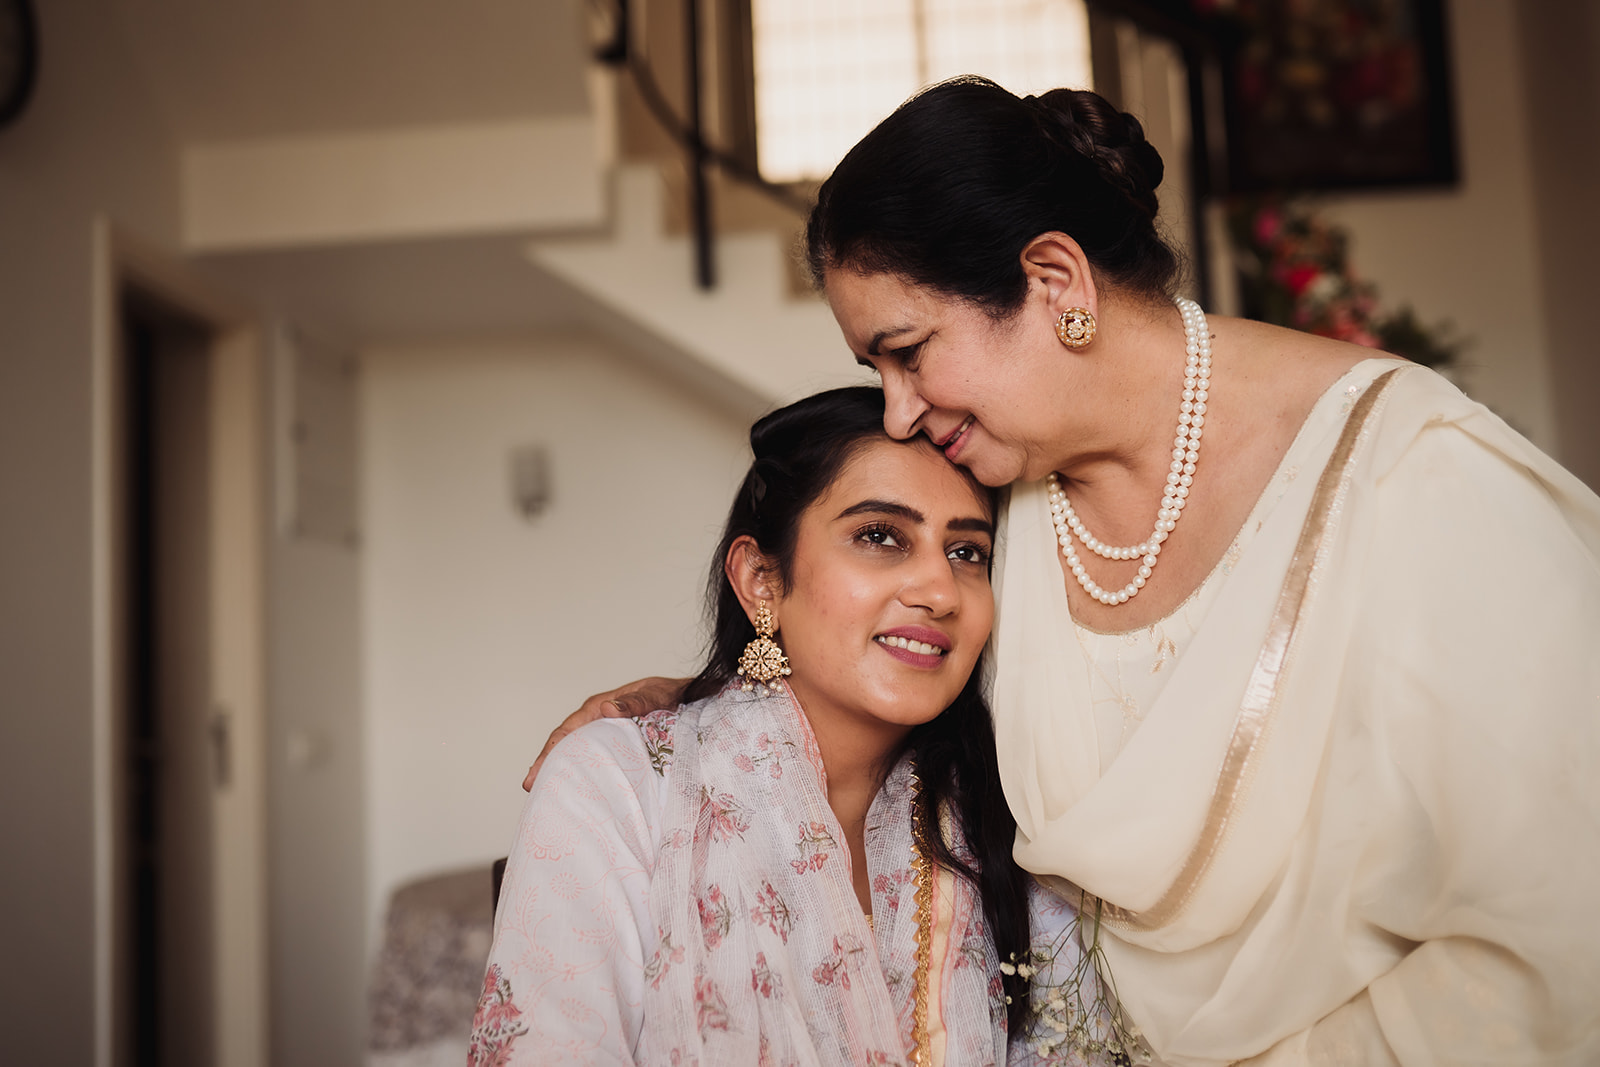 Bridal family portrait: The bride and her mom come together in a loving and memorable photograph